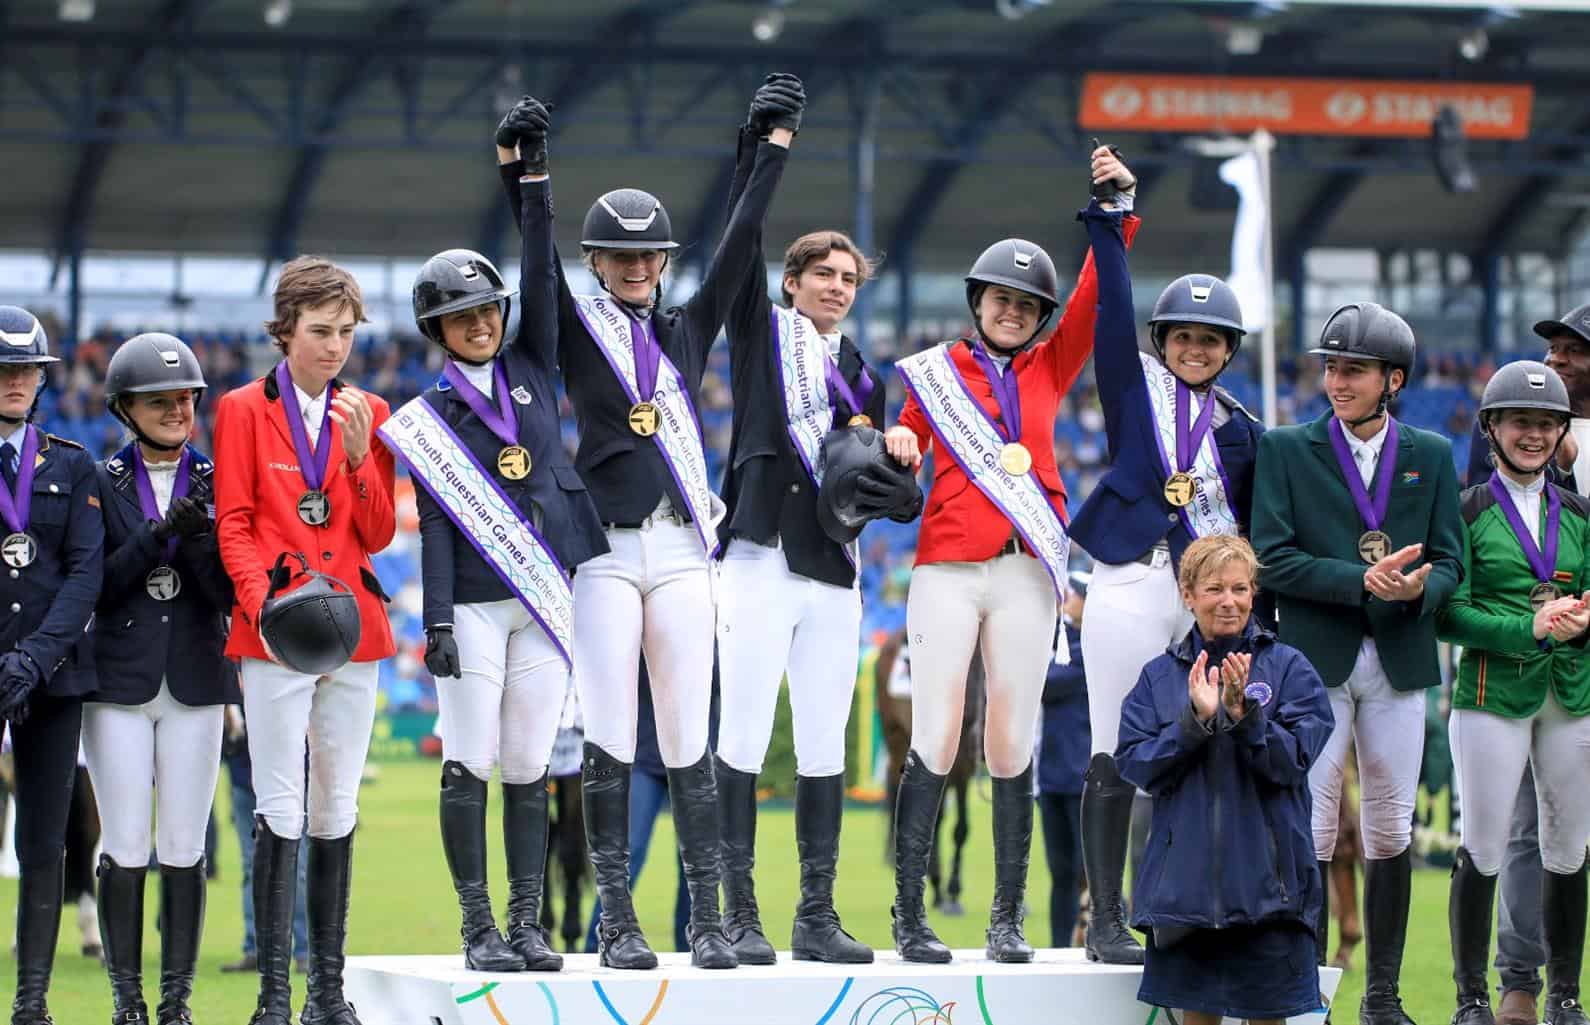 North American Team win Gold at the 2022 FEI Youth Equestrian Games